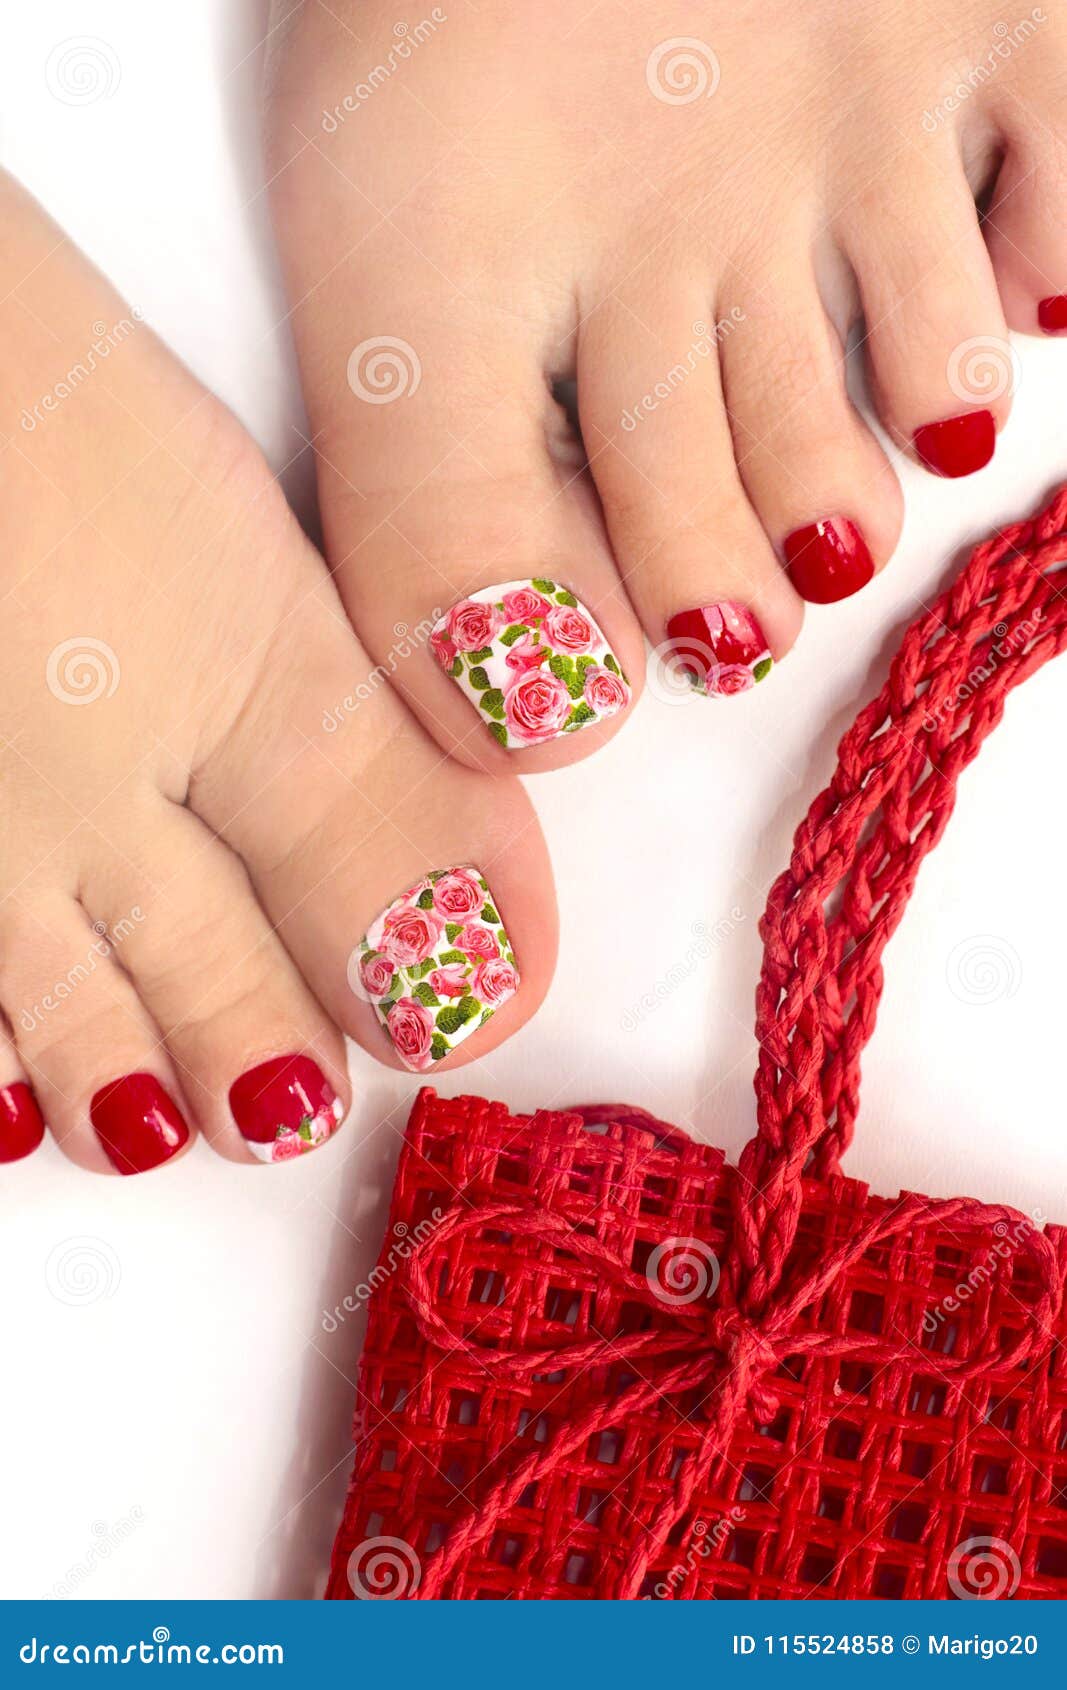 19 Cute Toe Nail Designs For Winter - Styleoholic